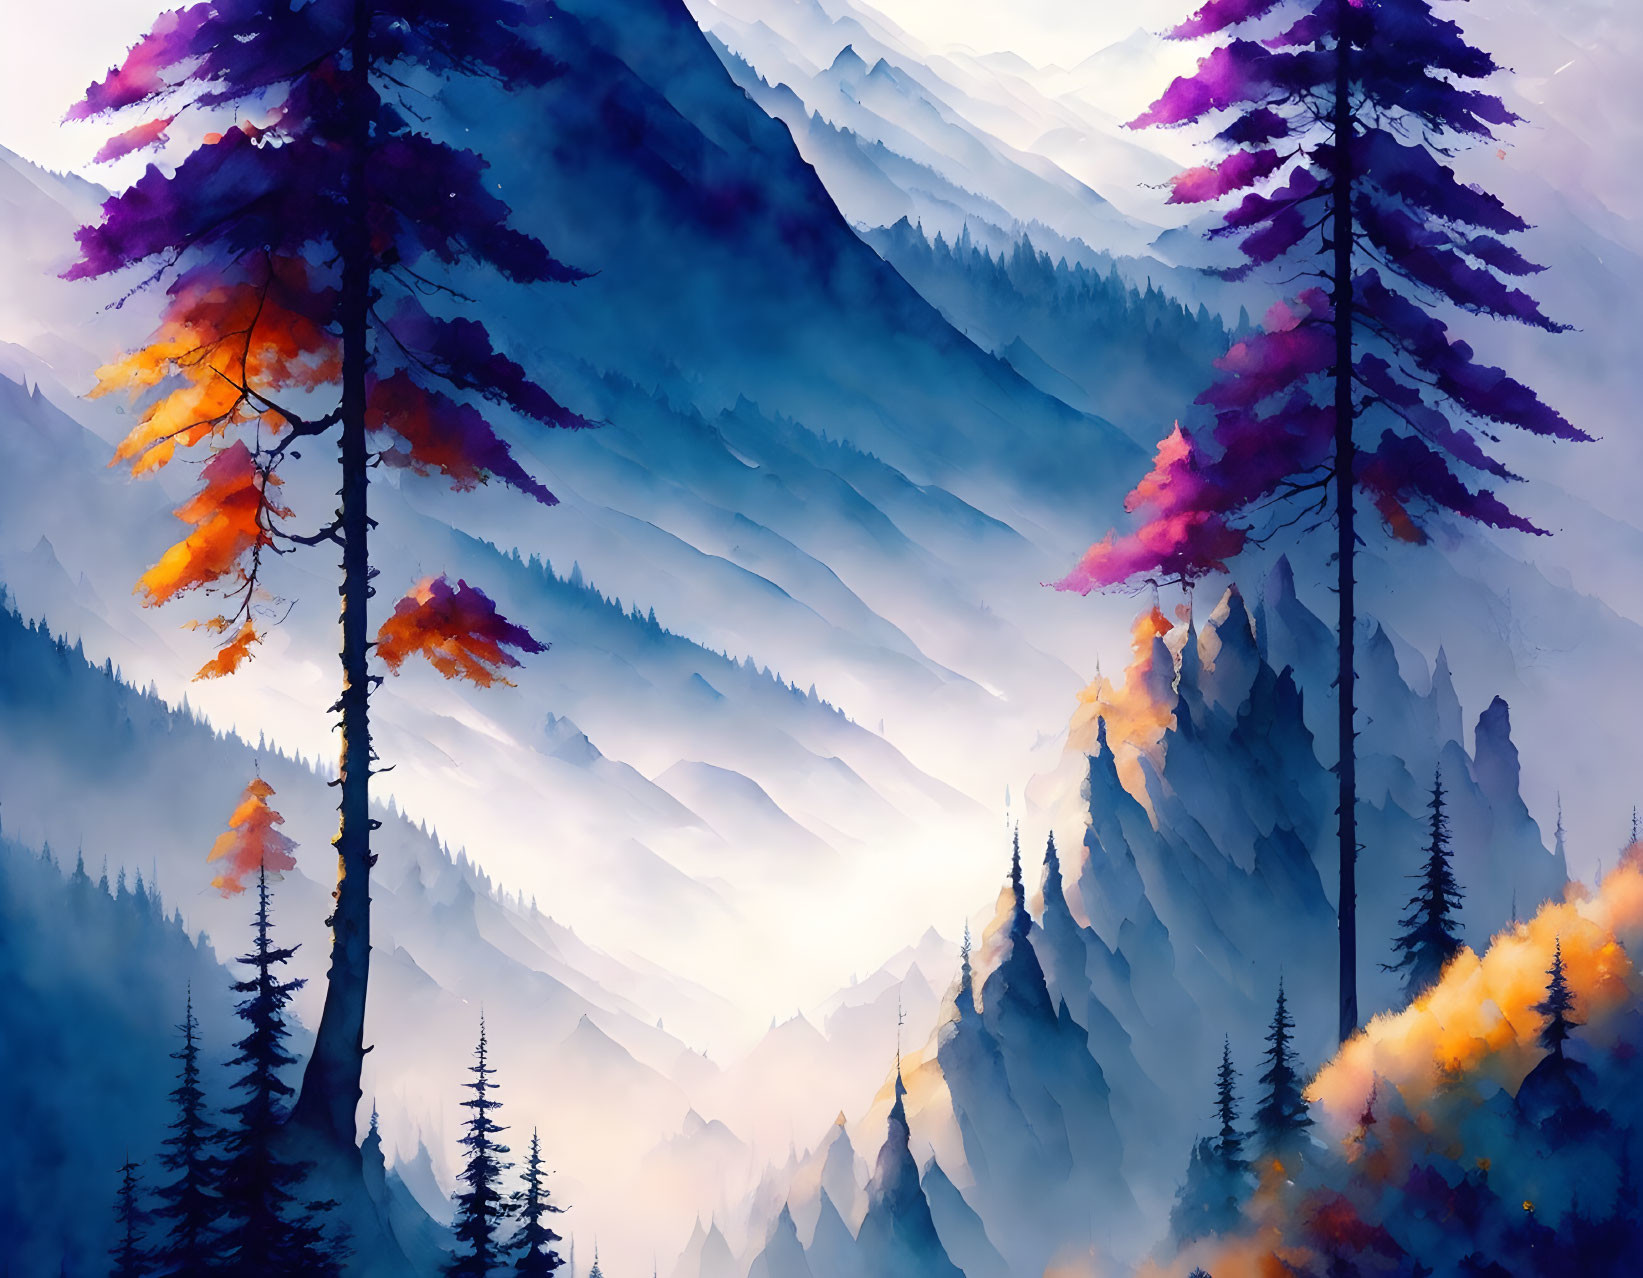 Colorful digital artwork of misty mountain range with purple and orange trees